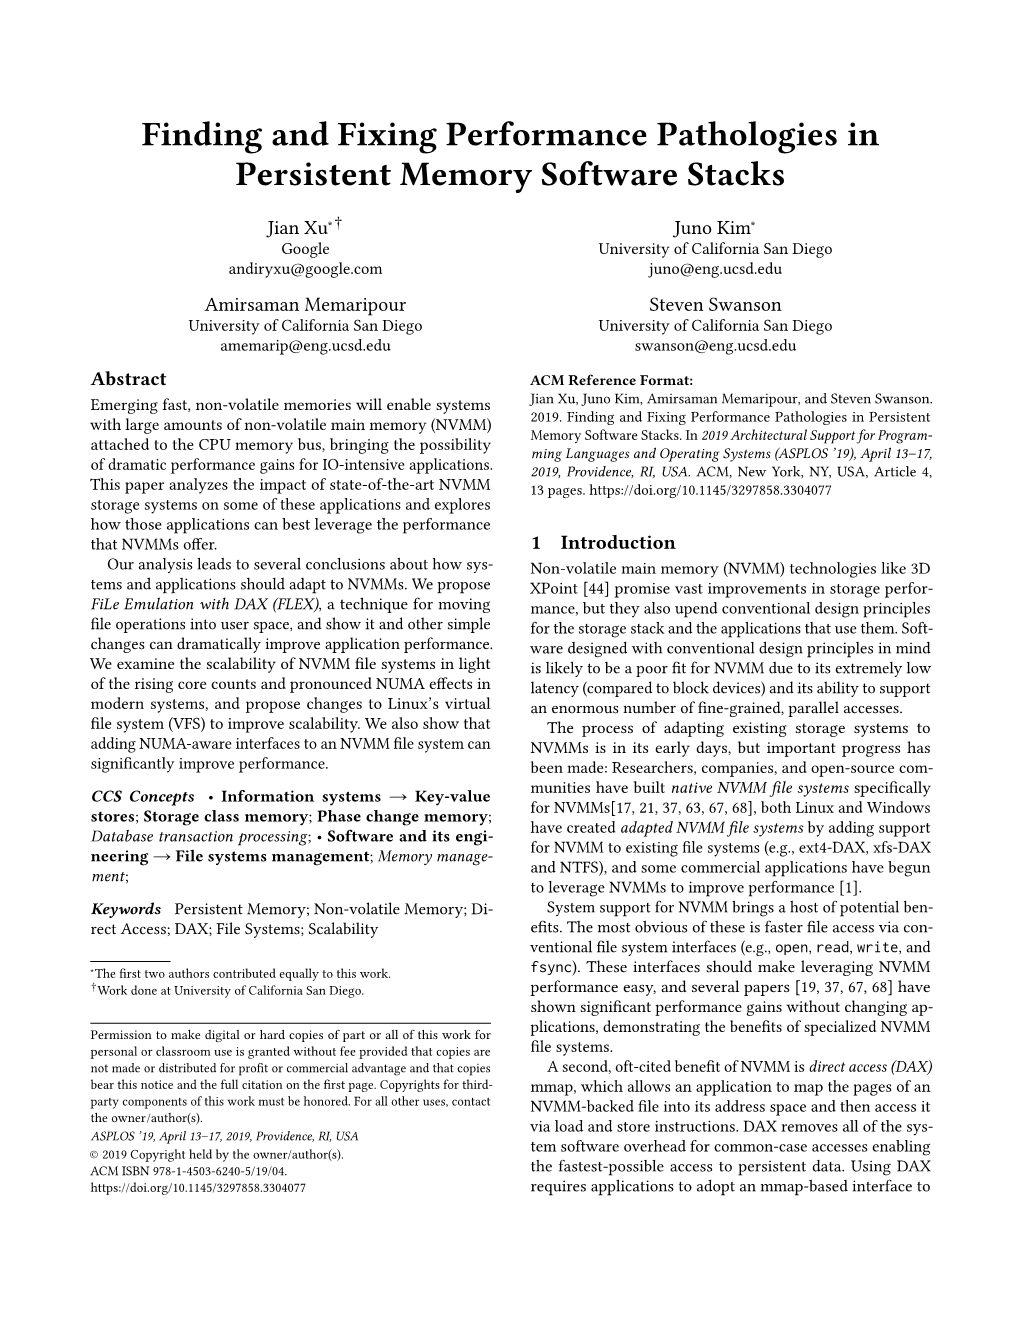 Finding and Fixing Performance Pathologies in Persistent Memory Software Stacks